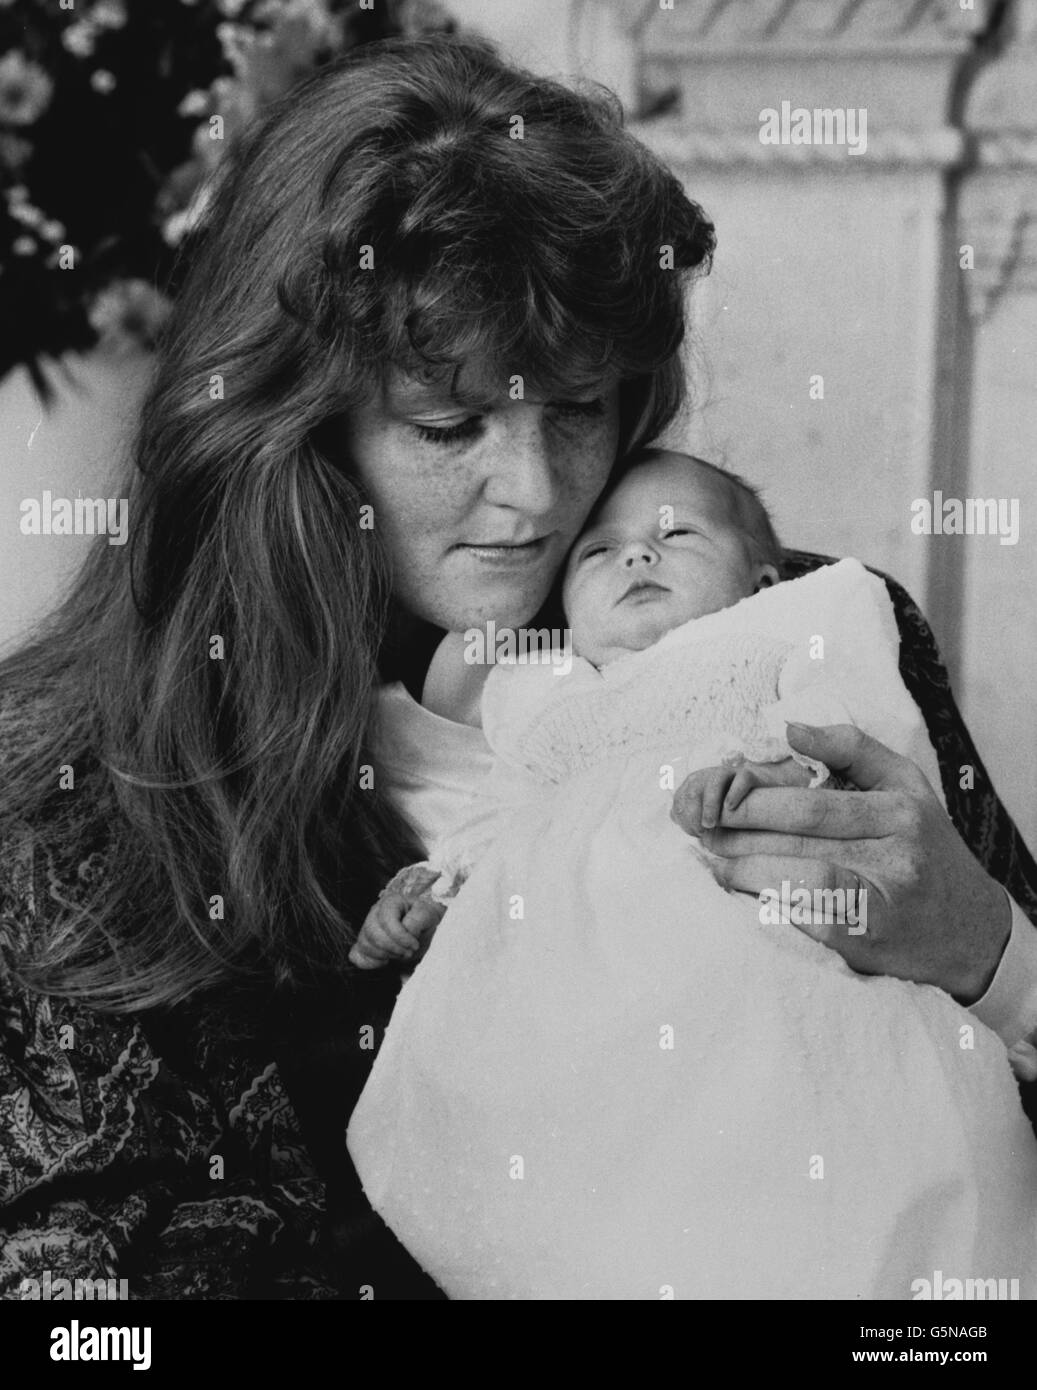 One of the first two official photographs by the Duke of York of his two-week-old daughter, her Royal Highness the Princess Beatrice of York in the arms of her mother, the Duchess of York, at Balmoral. *Low res scan - Hi res scan on request Stock Photo